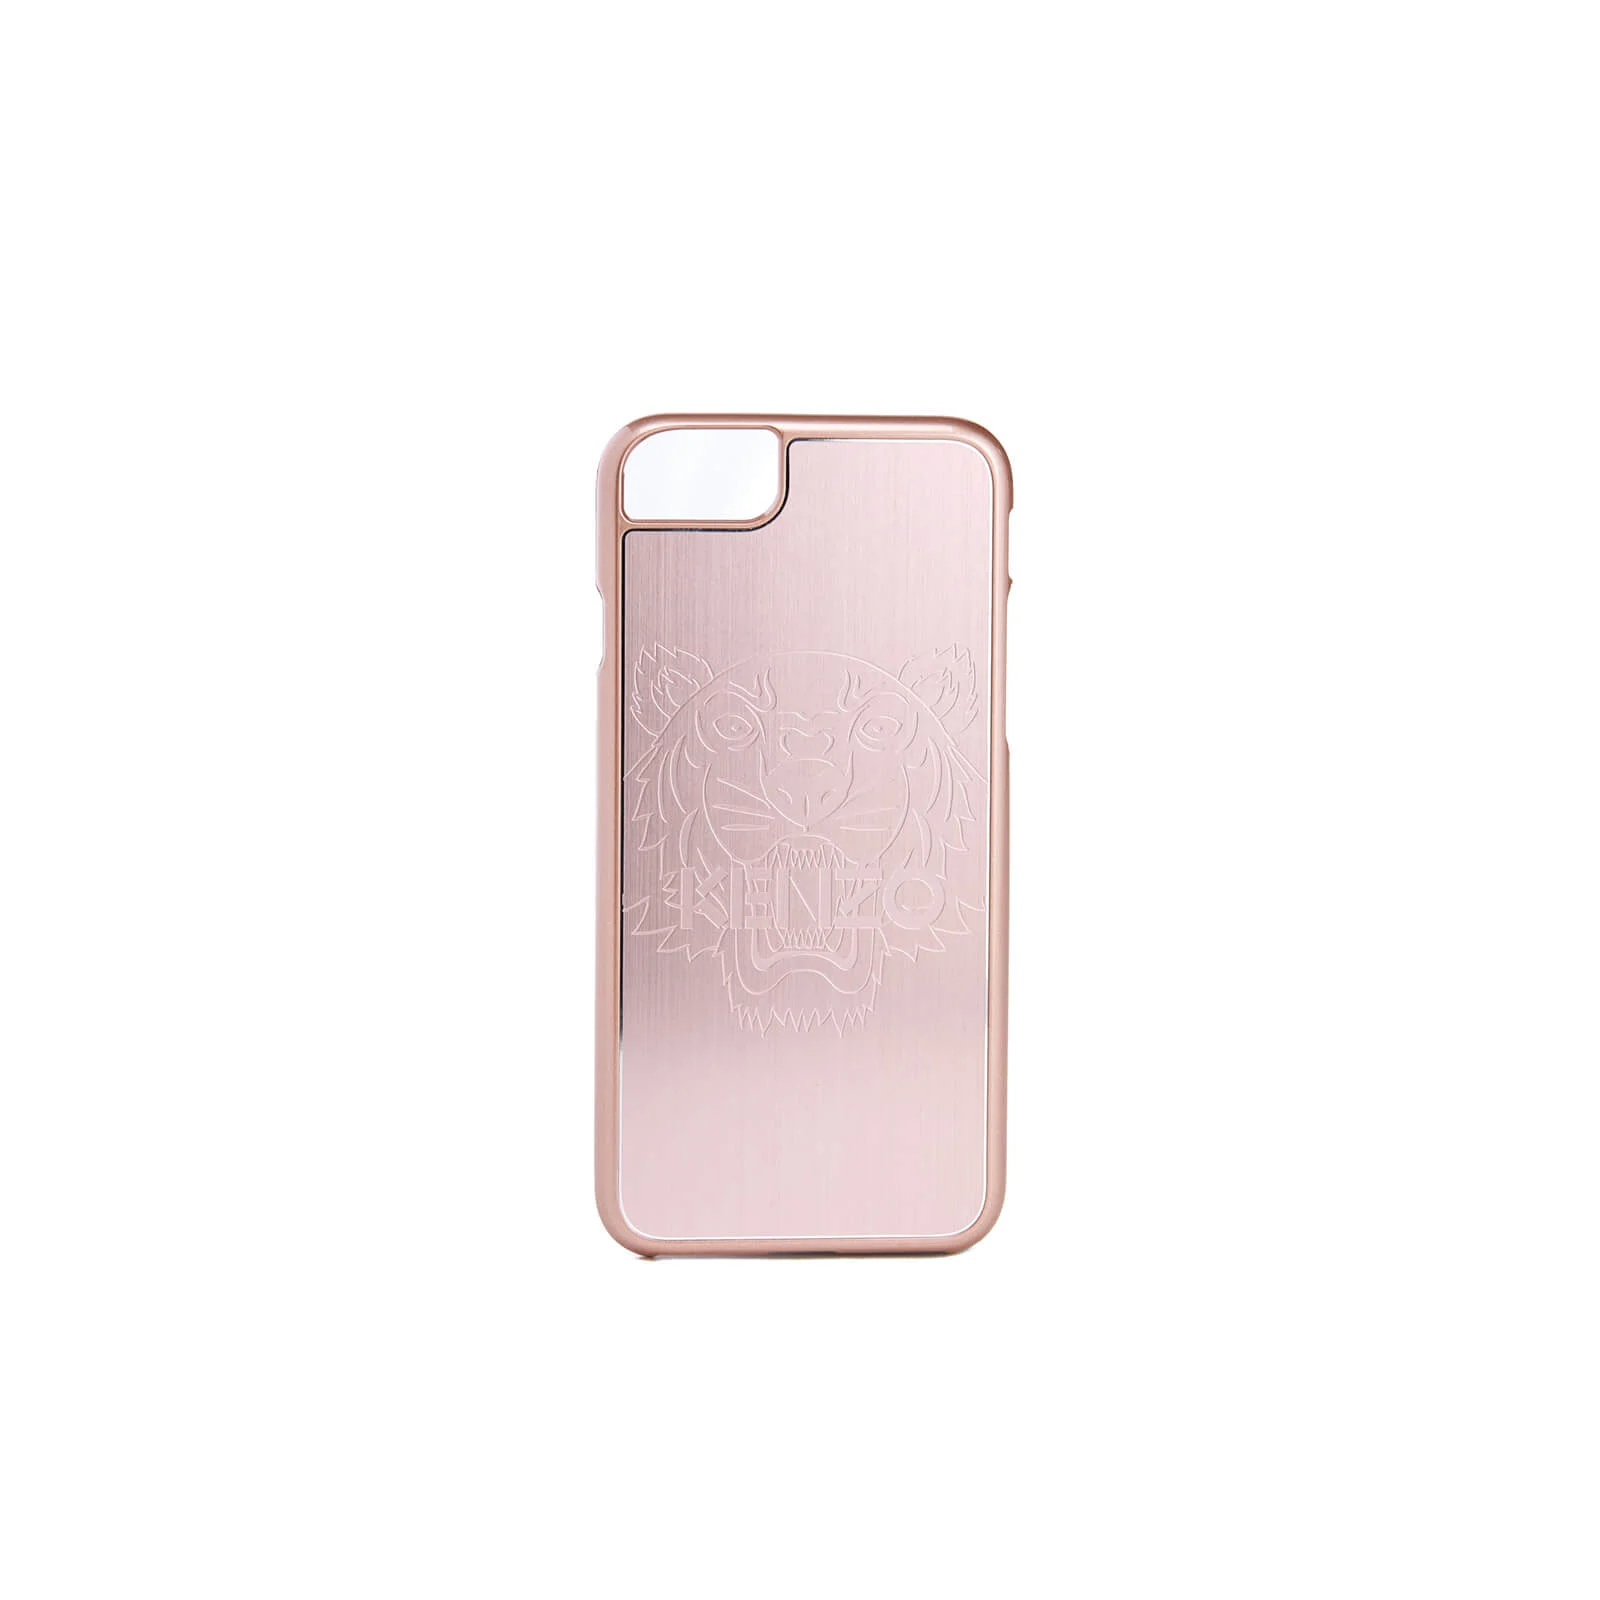 KENZO Women's iPhone 7 Phone Cover - Pink Image 1